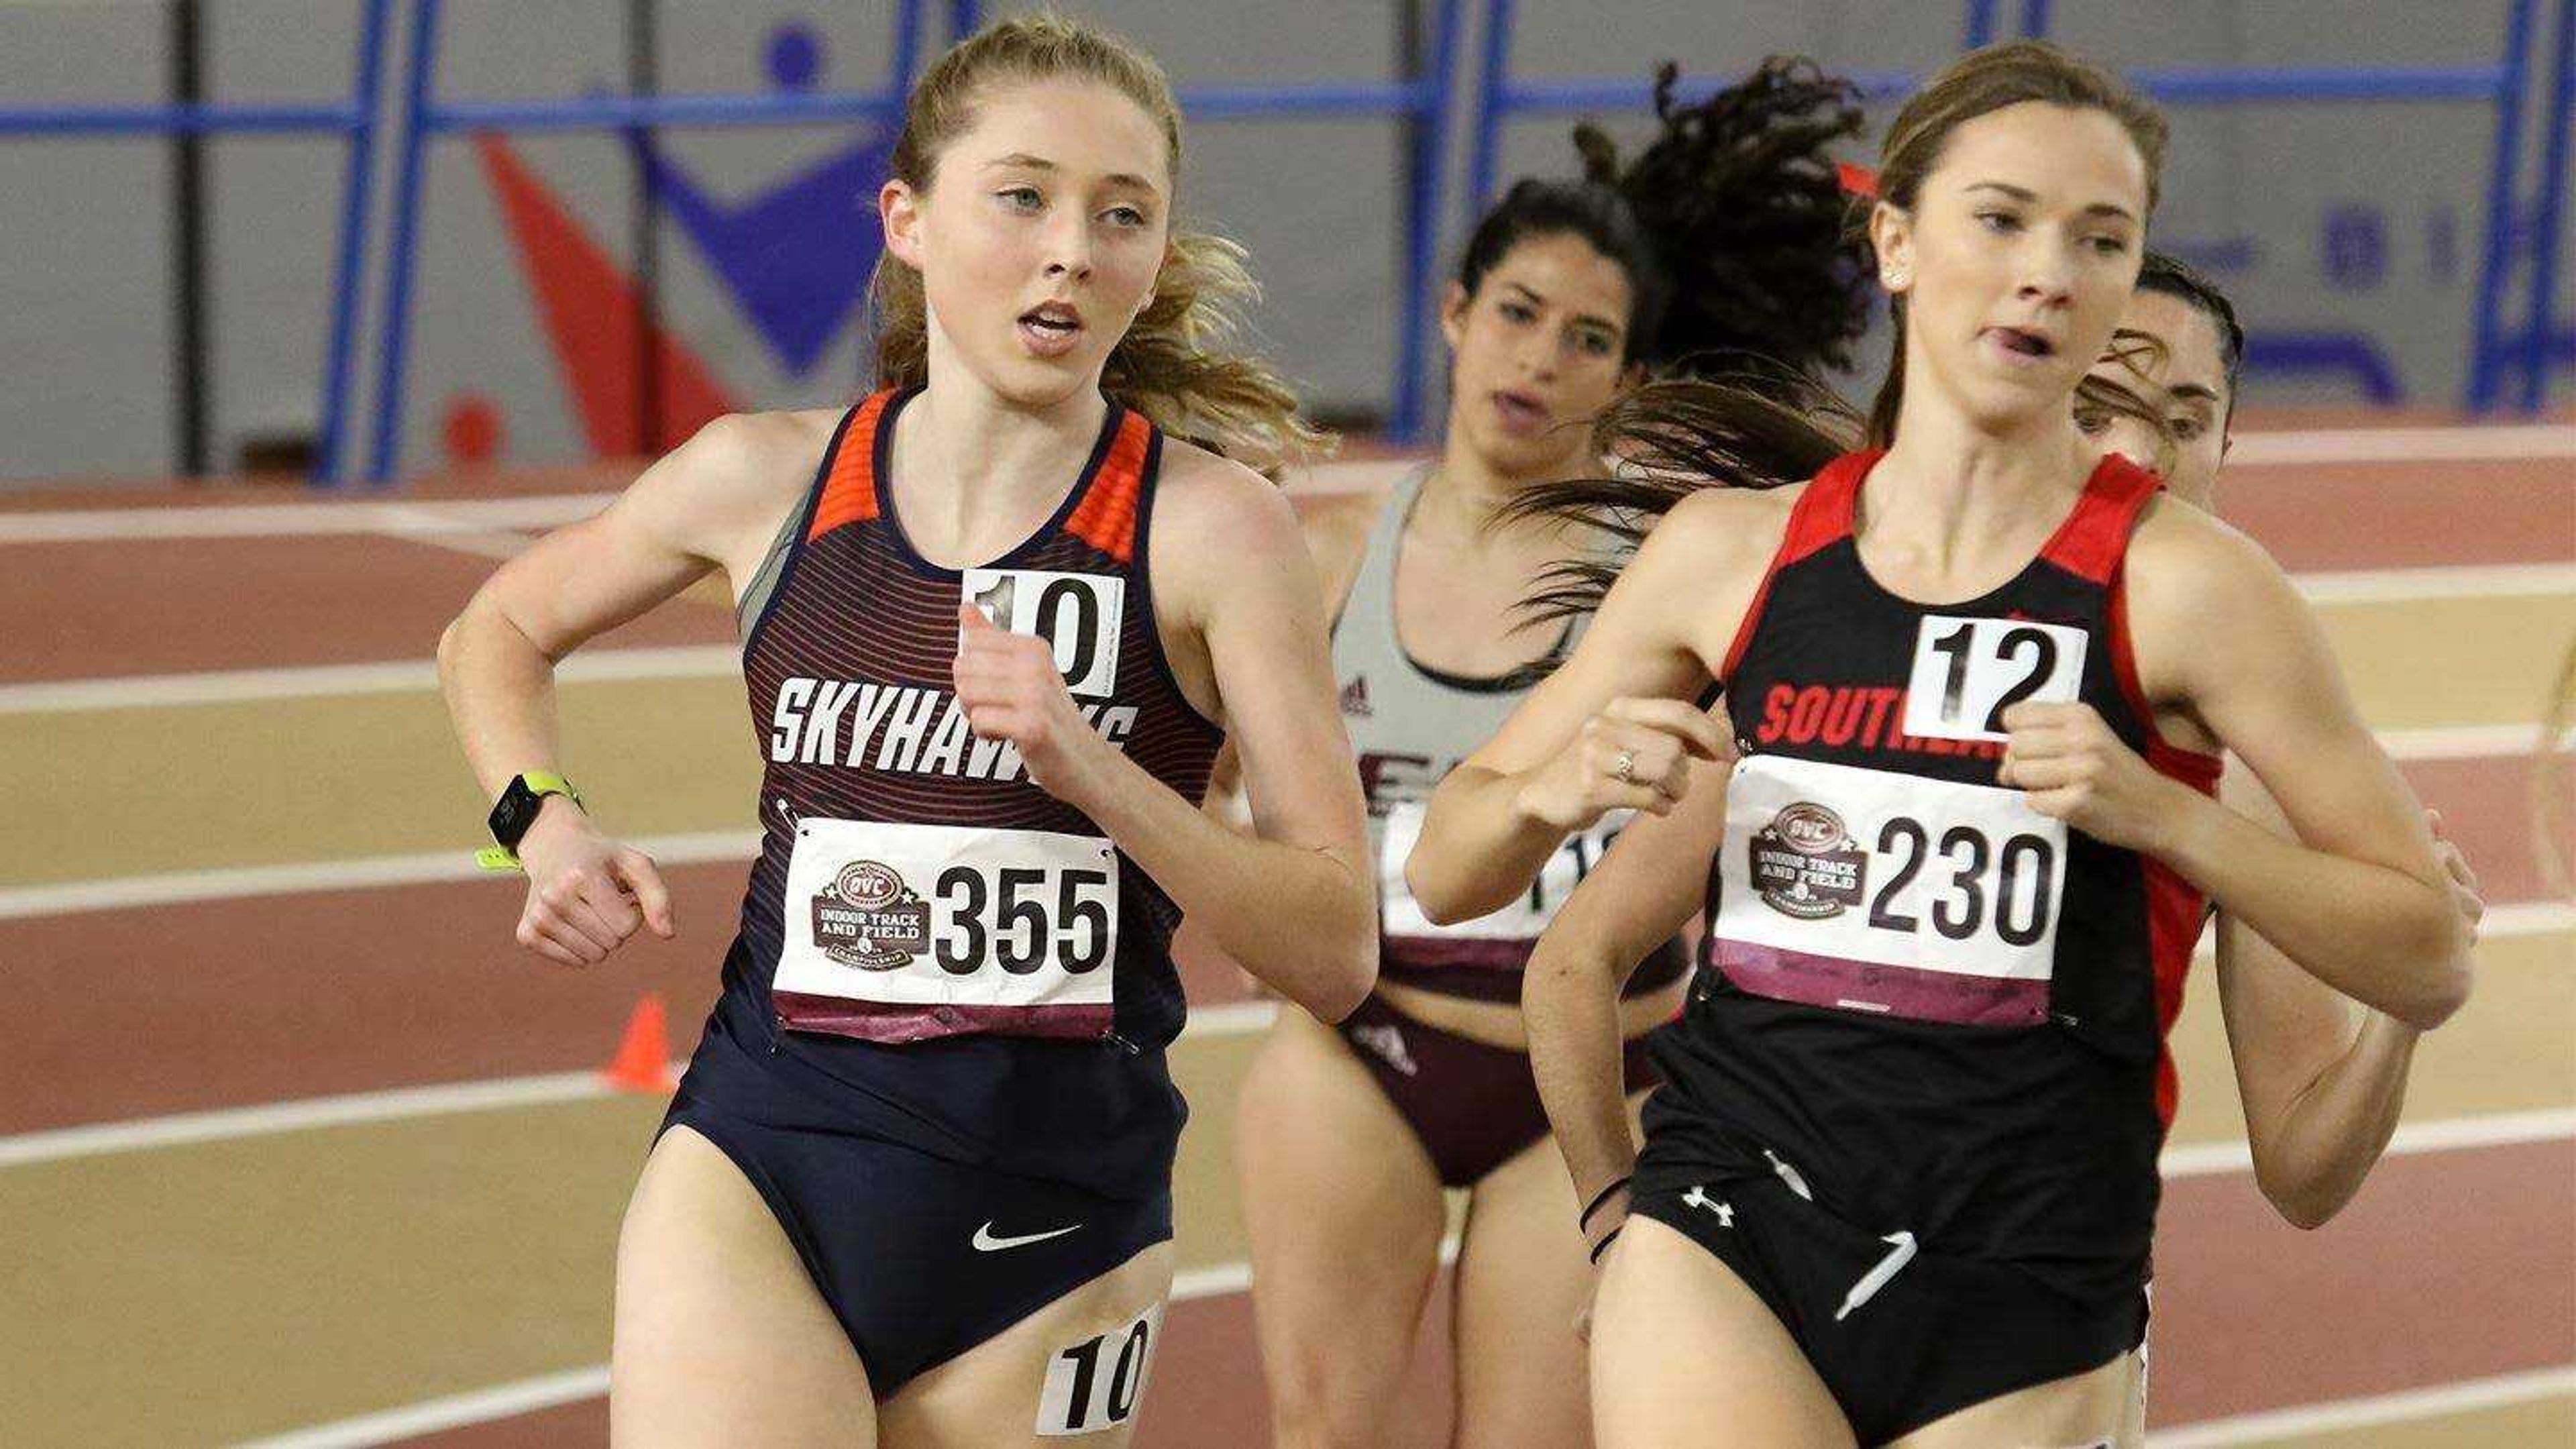 Southeast track continues indoor season